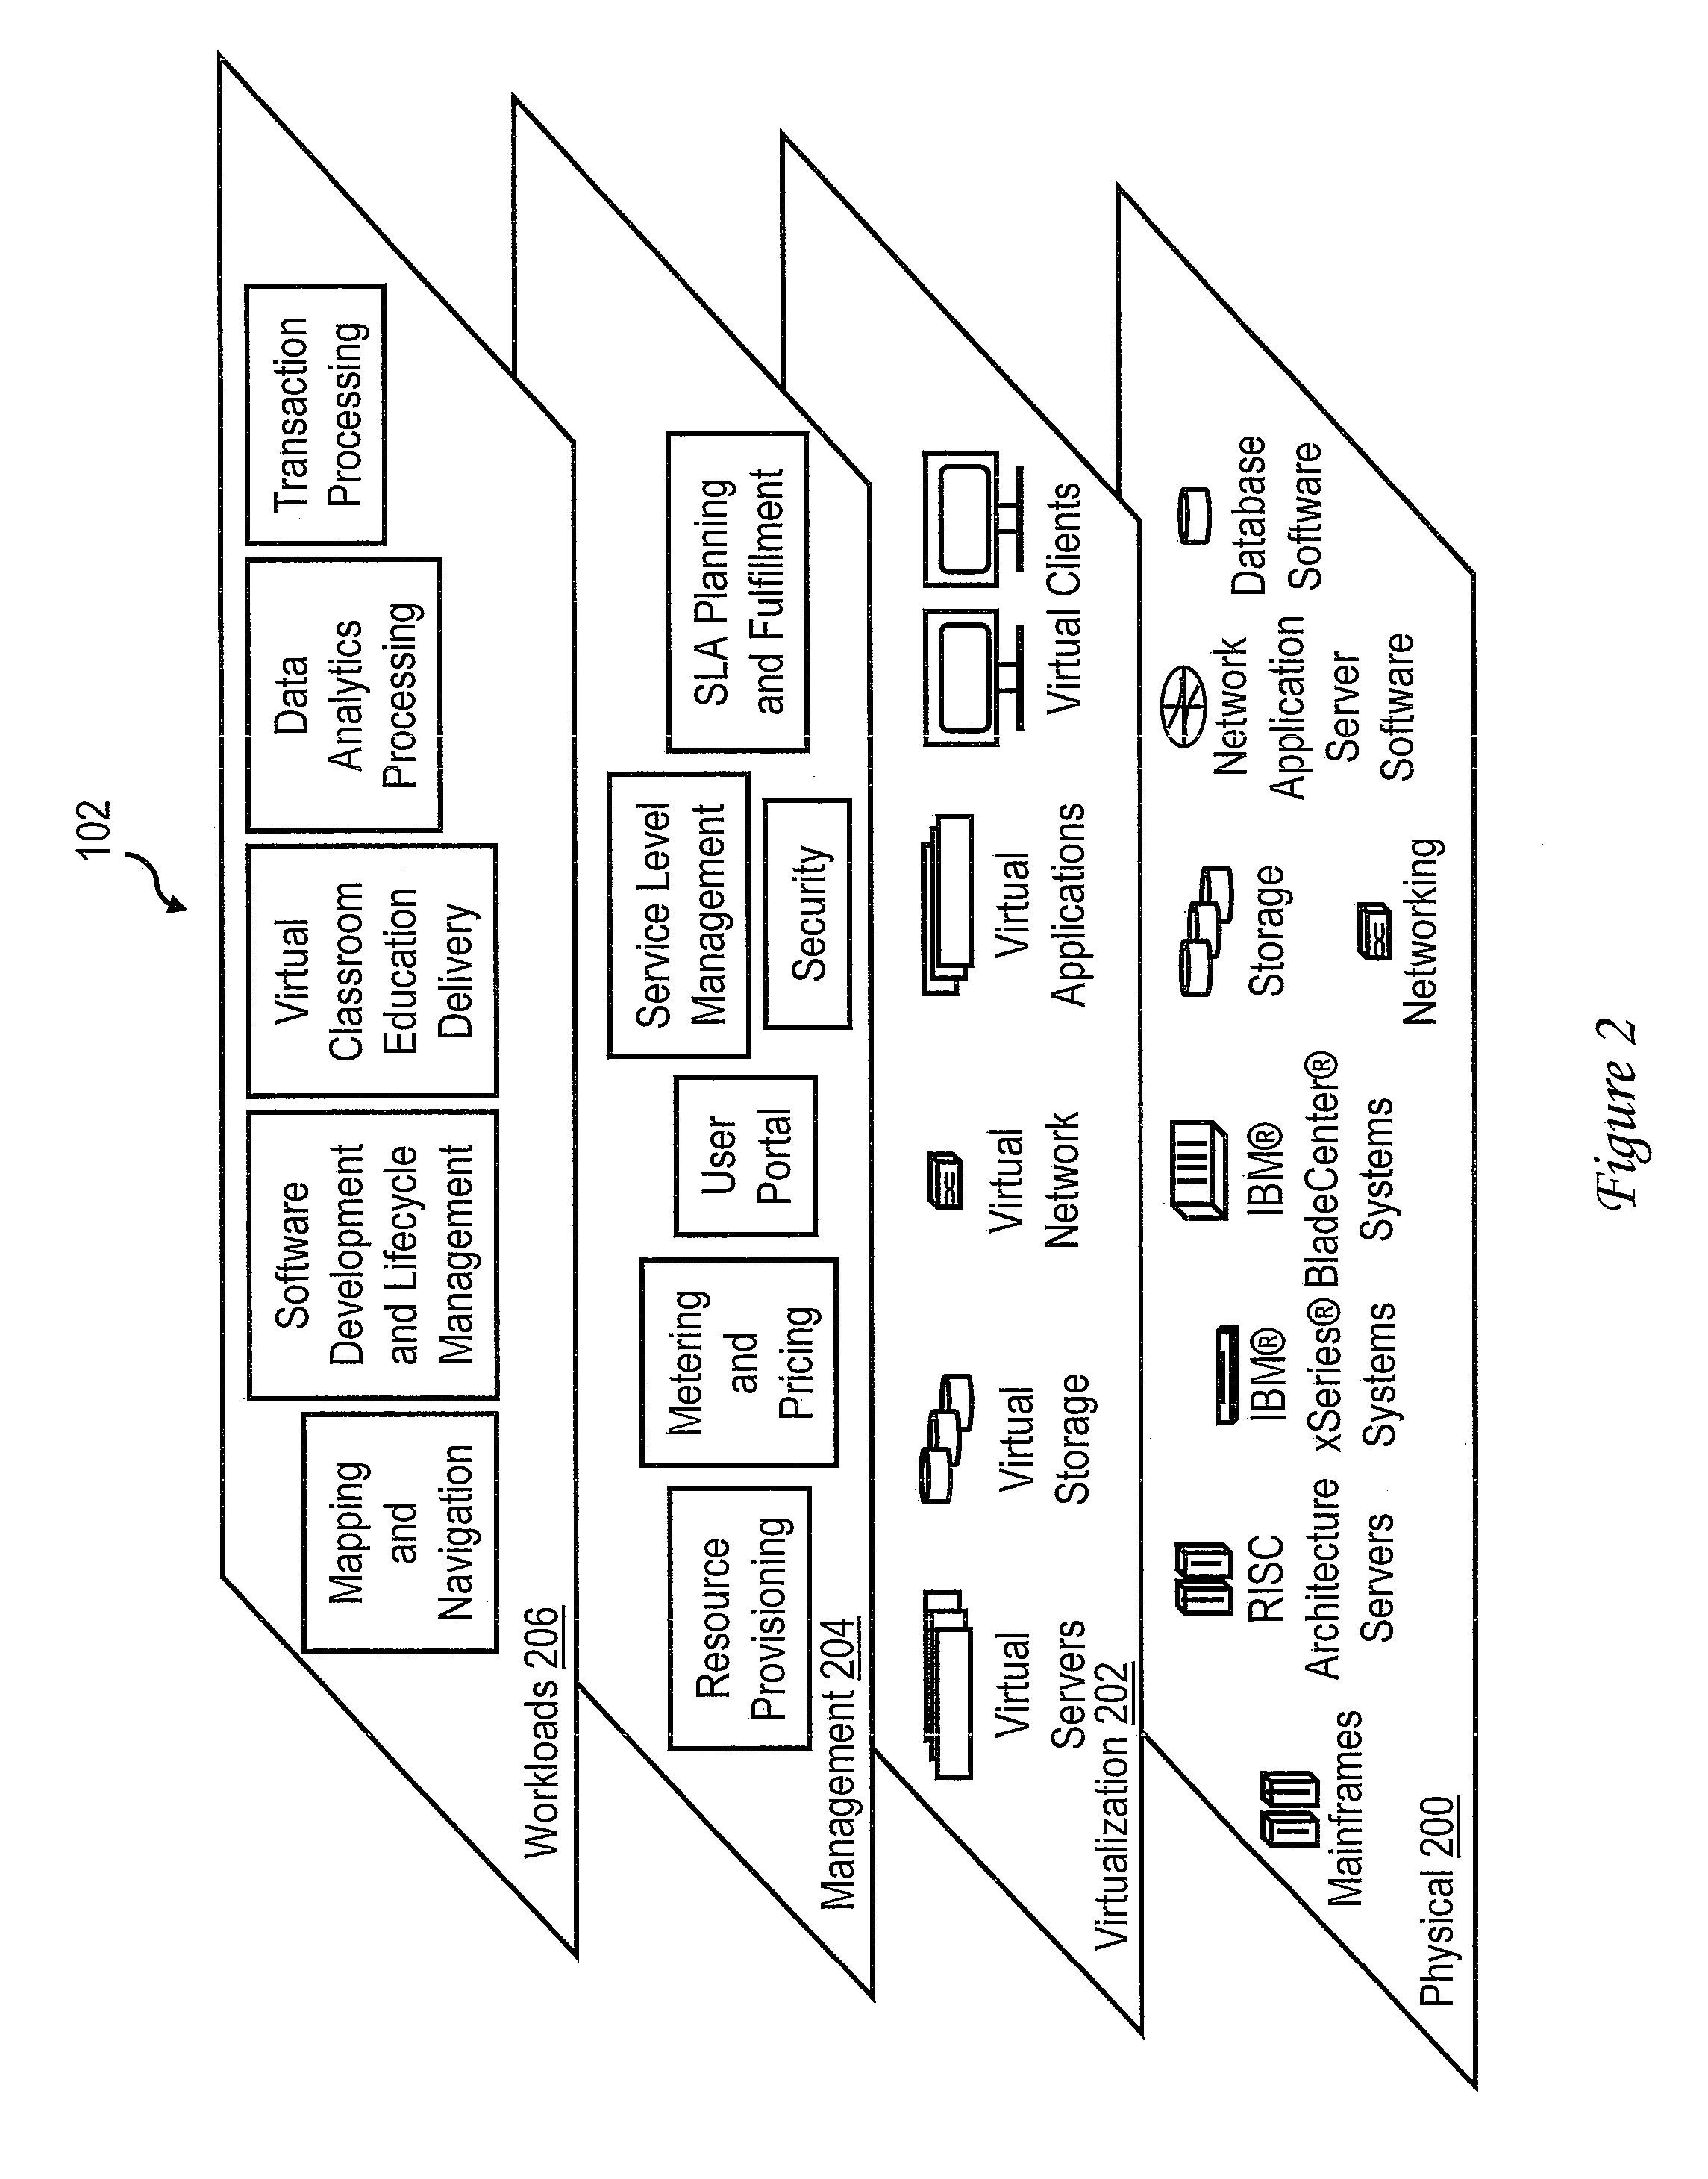 Hypervisor routing between networks in a virtual networking environment